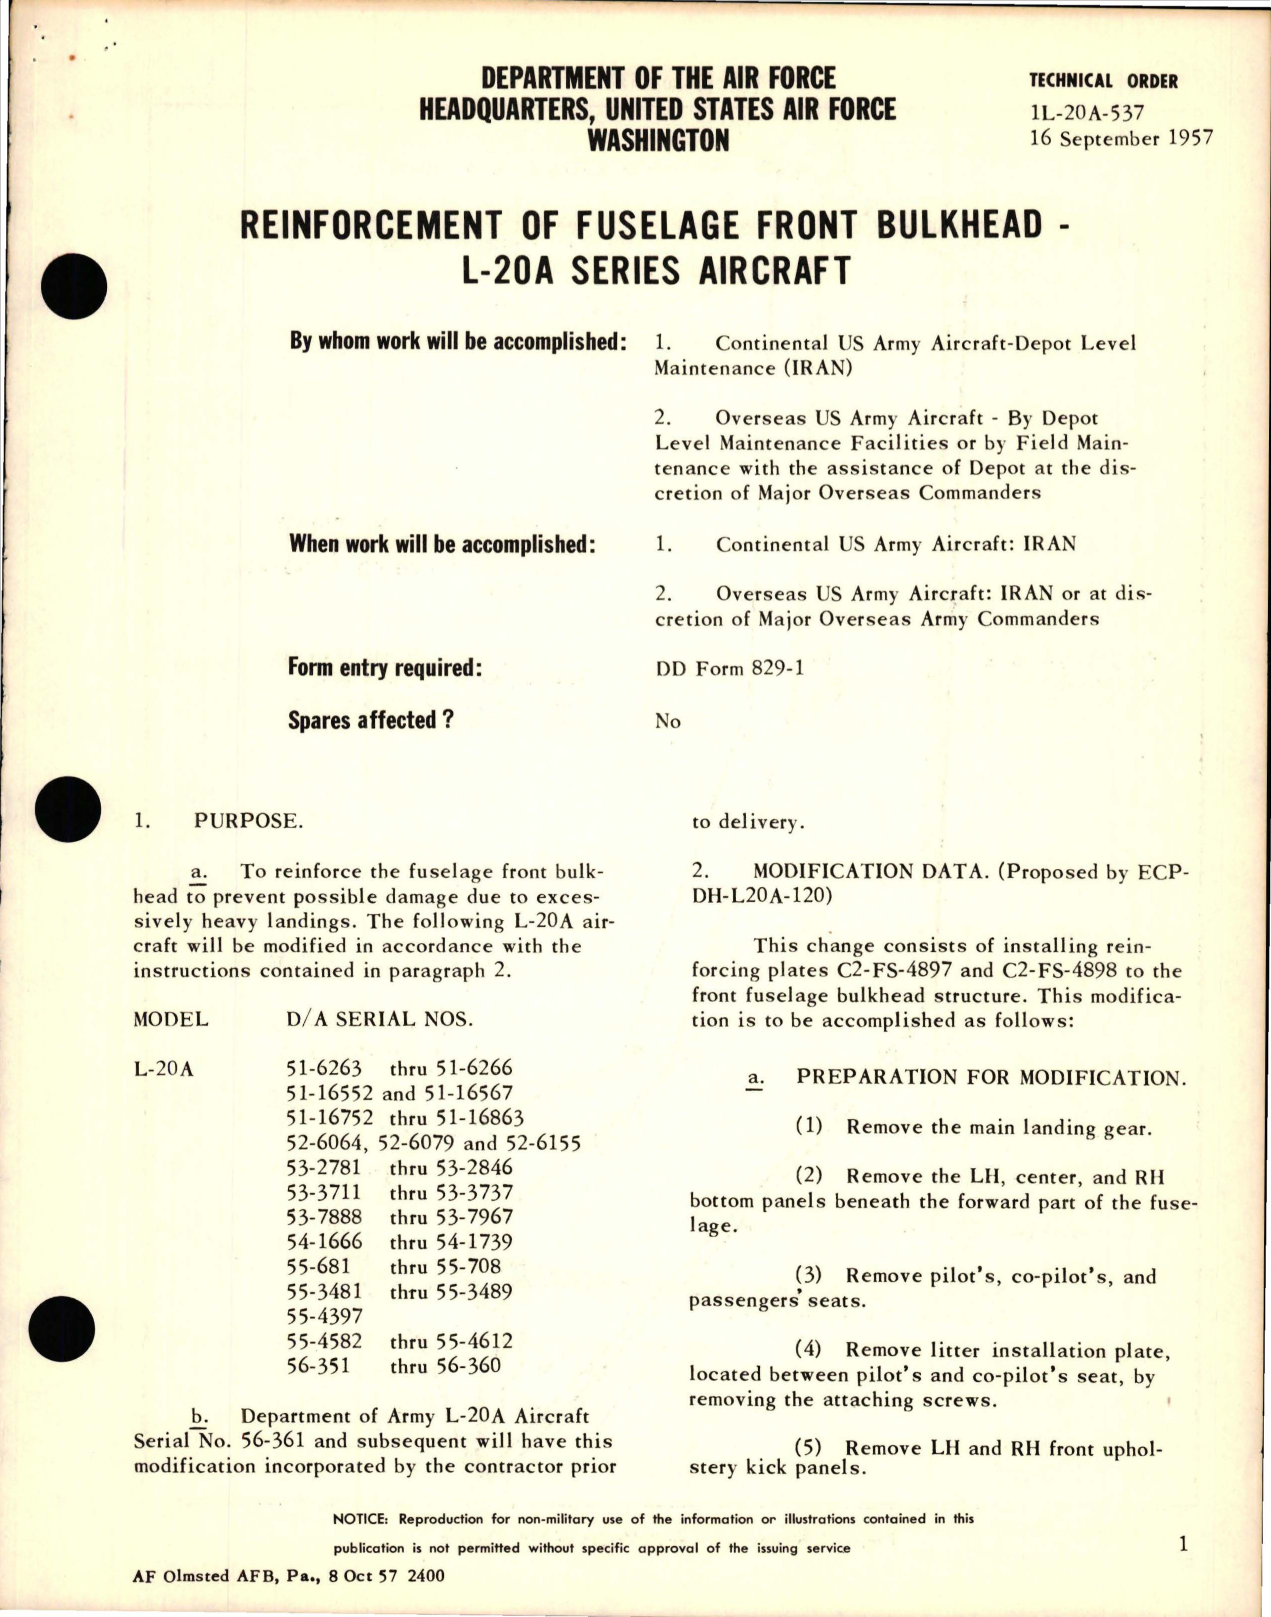 Sample page 1 from AirCorps Library document: Reinforcement of Fuselage Front Bulkhead - L-20A Series